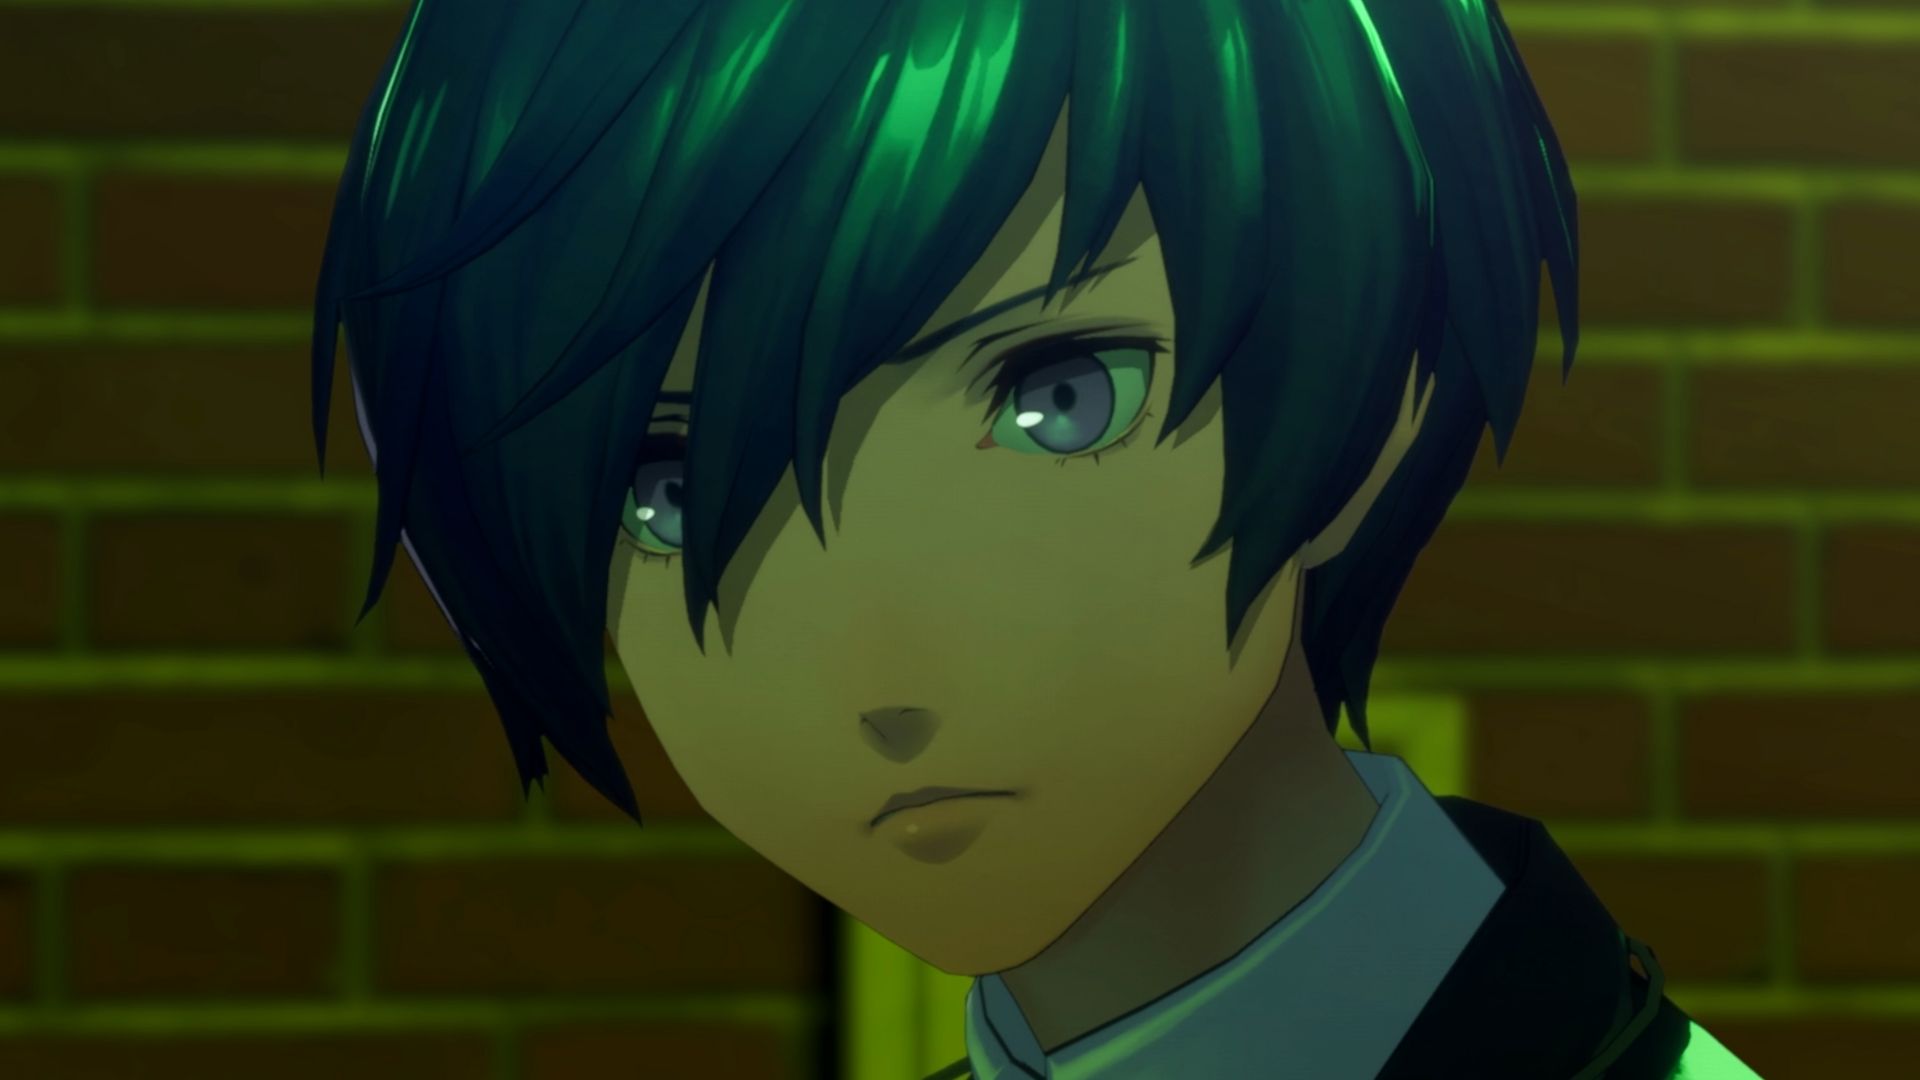 Persona 3 Reload Switch port mentioned in official YouTube description